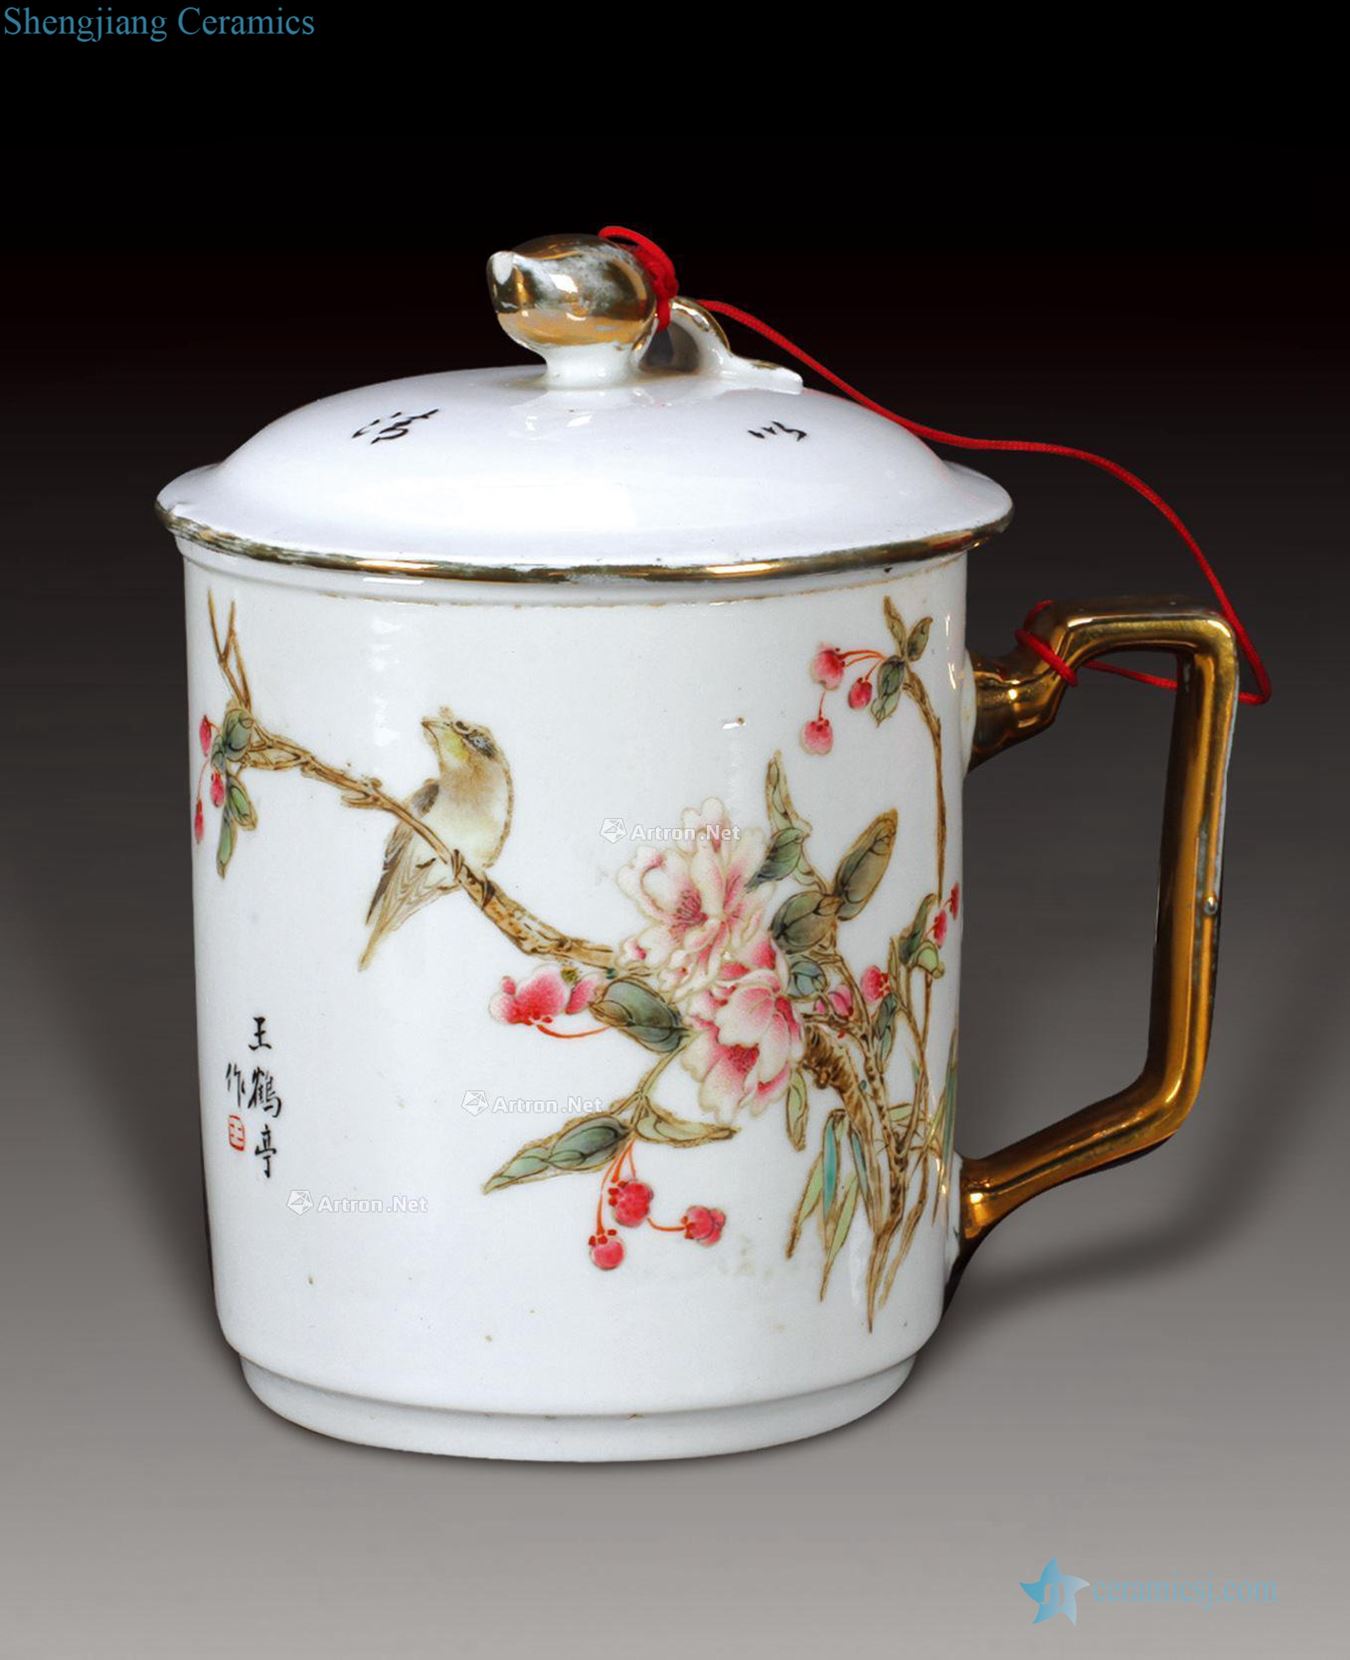 In the 19th century Painting of flowers and enamel cup he-ting wang model